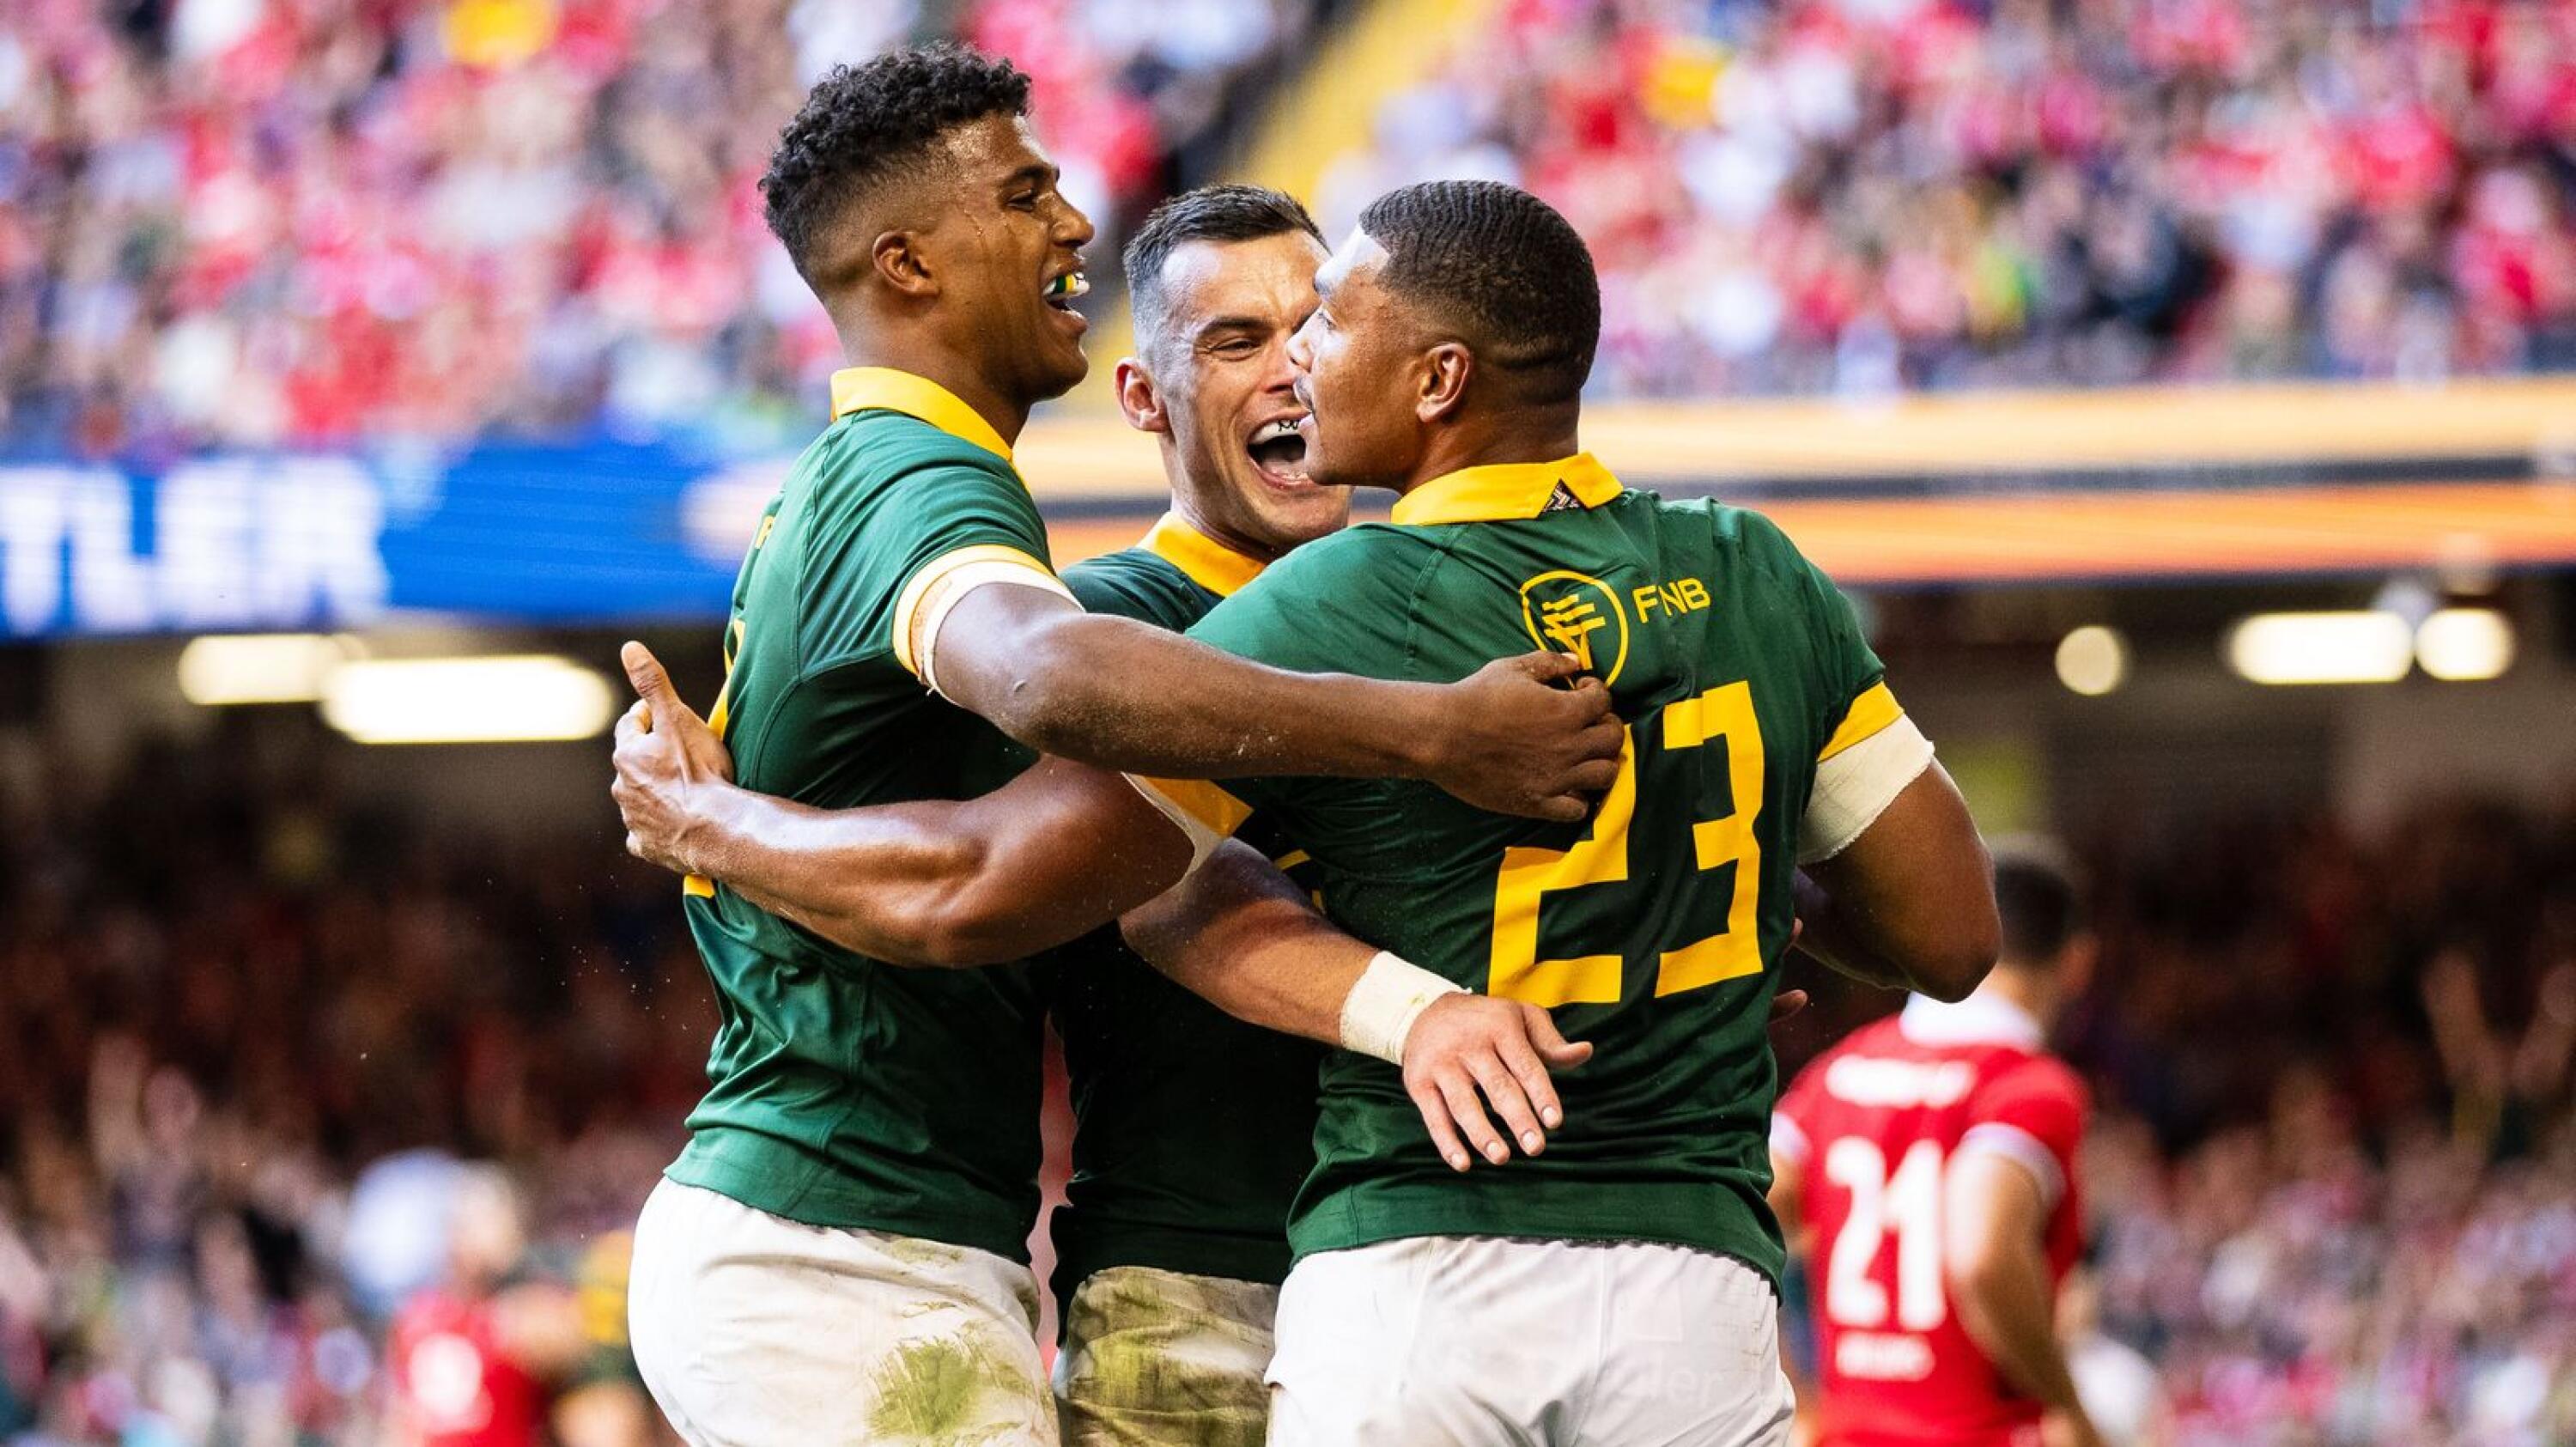 Damian Willemse of South Africa celebrates scoring his sides eighth try with team-mates Jesse Kriel & Canan Moodie during the Summer Nations Series 2023, Rugby Union Friendly match between Wales and South Africa on 19 August 2023 at Principality Stadium in Cardiff, Wales